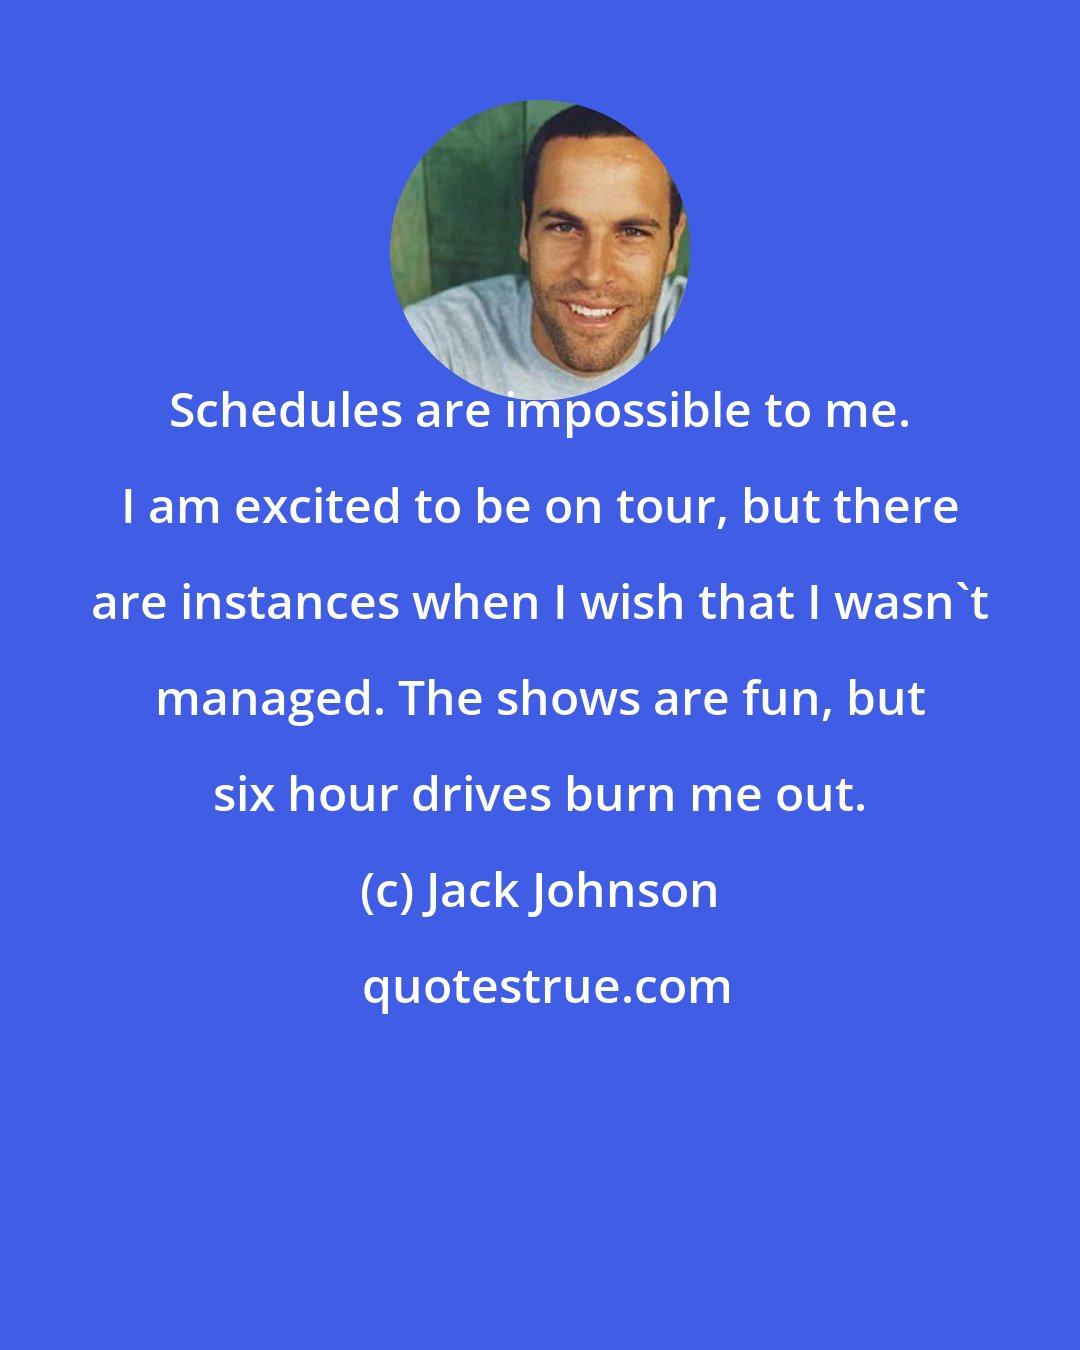 Jack Johnson: Schedules are impossible to me. I am excited to be on tour, but there are instances when I wish that I wasn't managed. The shows are fun, but six hour drives burn me out.